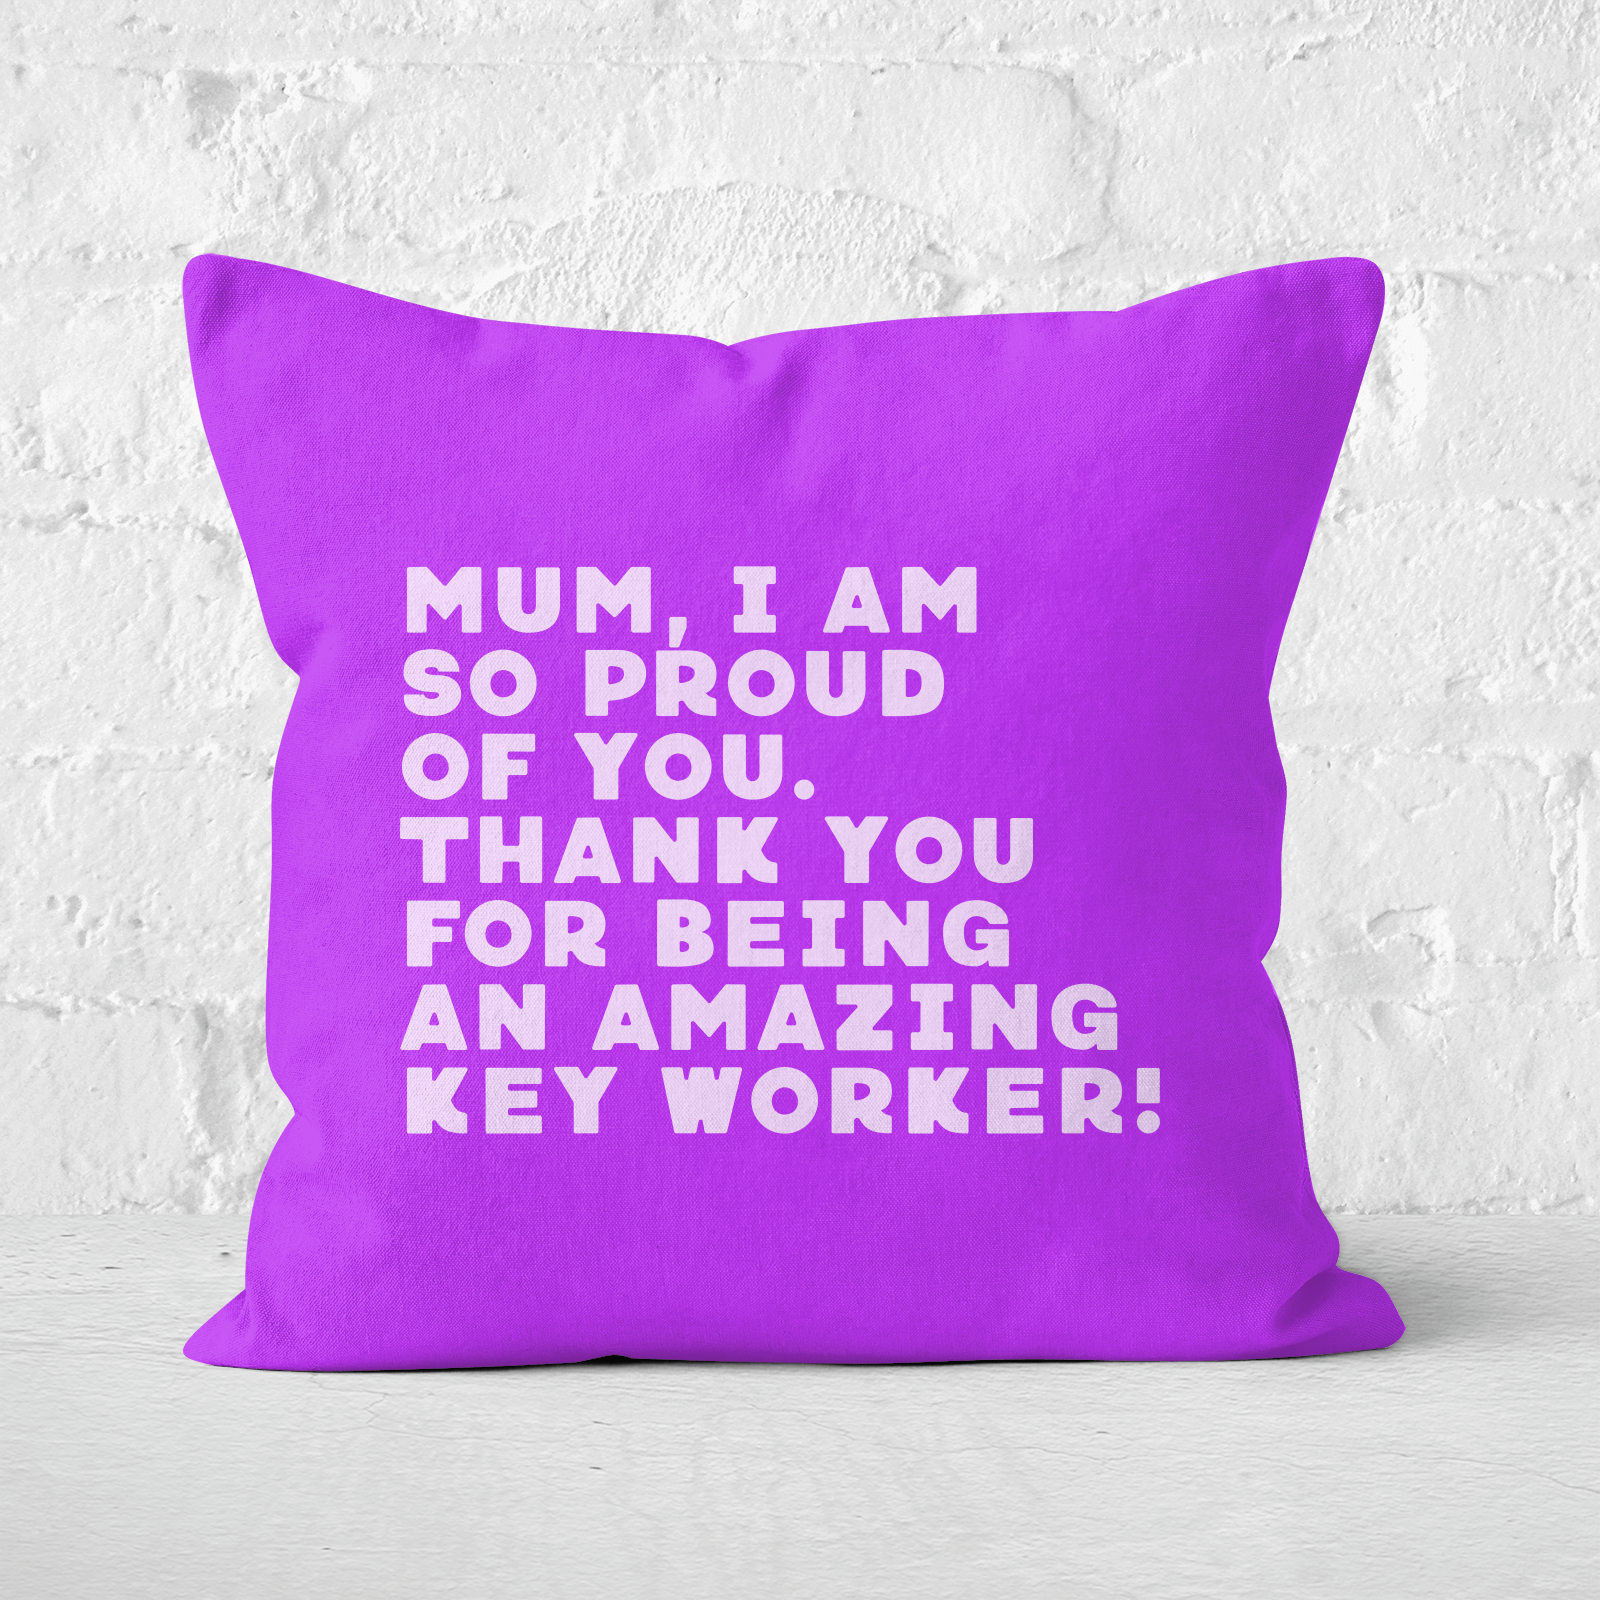 Mum, I Am So Proud Of You. Square Cushion - 60x60cm - Soft Touch